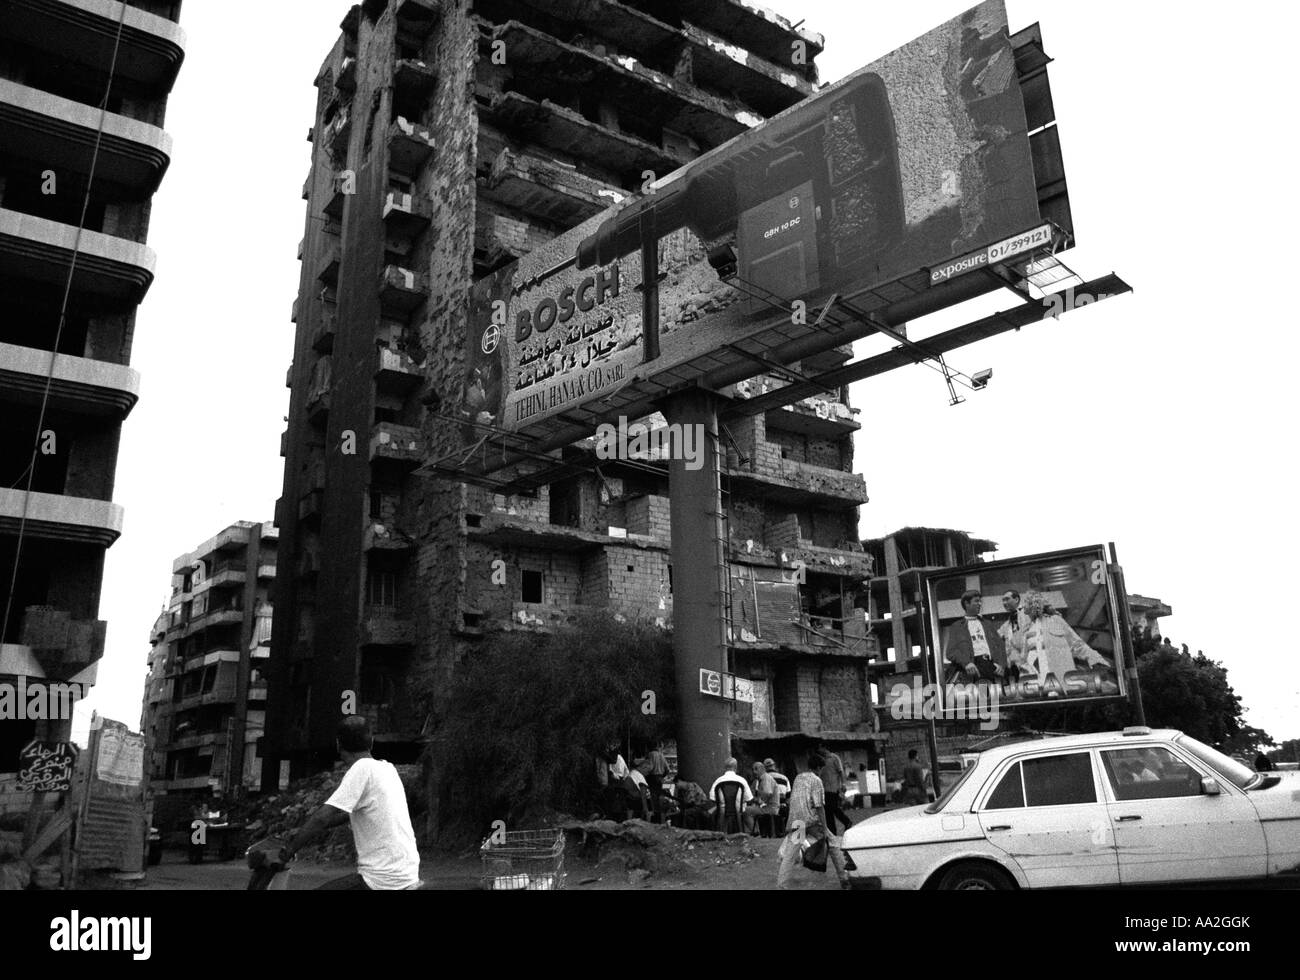 Advertisement for Bosch power drills near buildings damaged during the civil war in Beirut, Lebanon Stock Photo